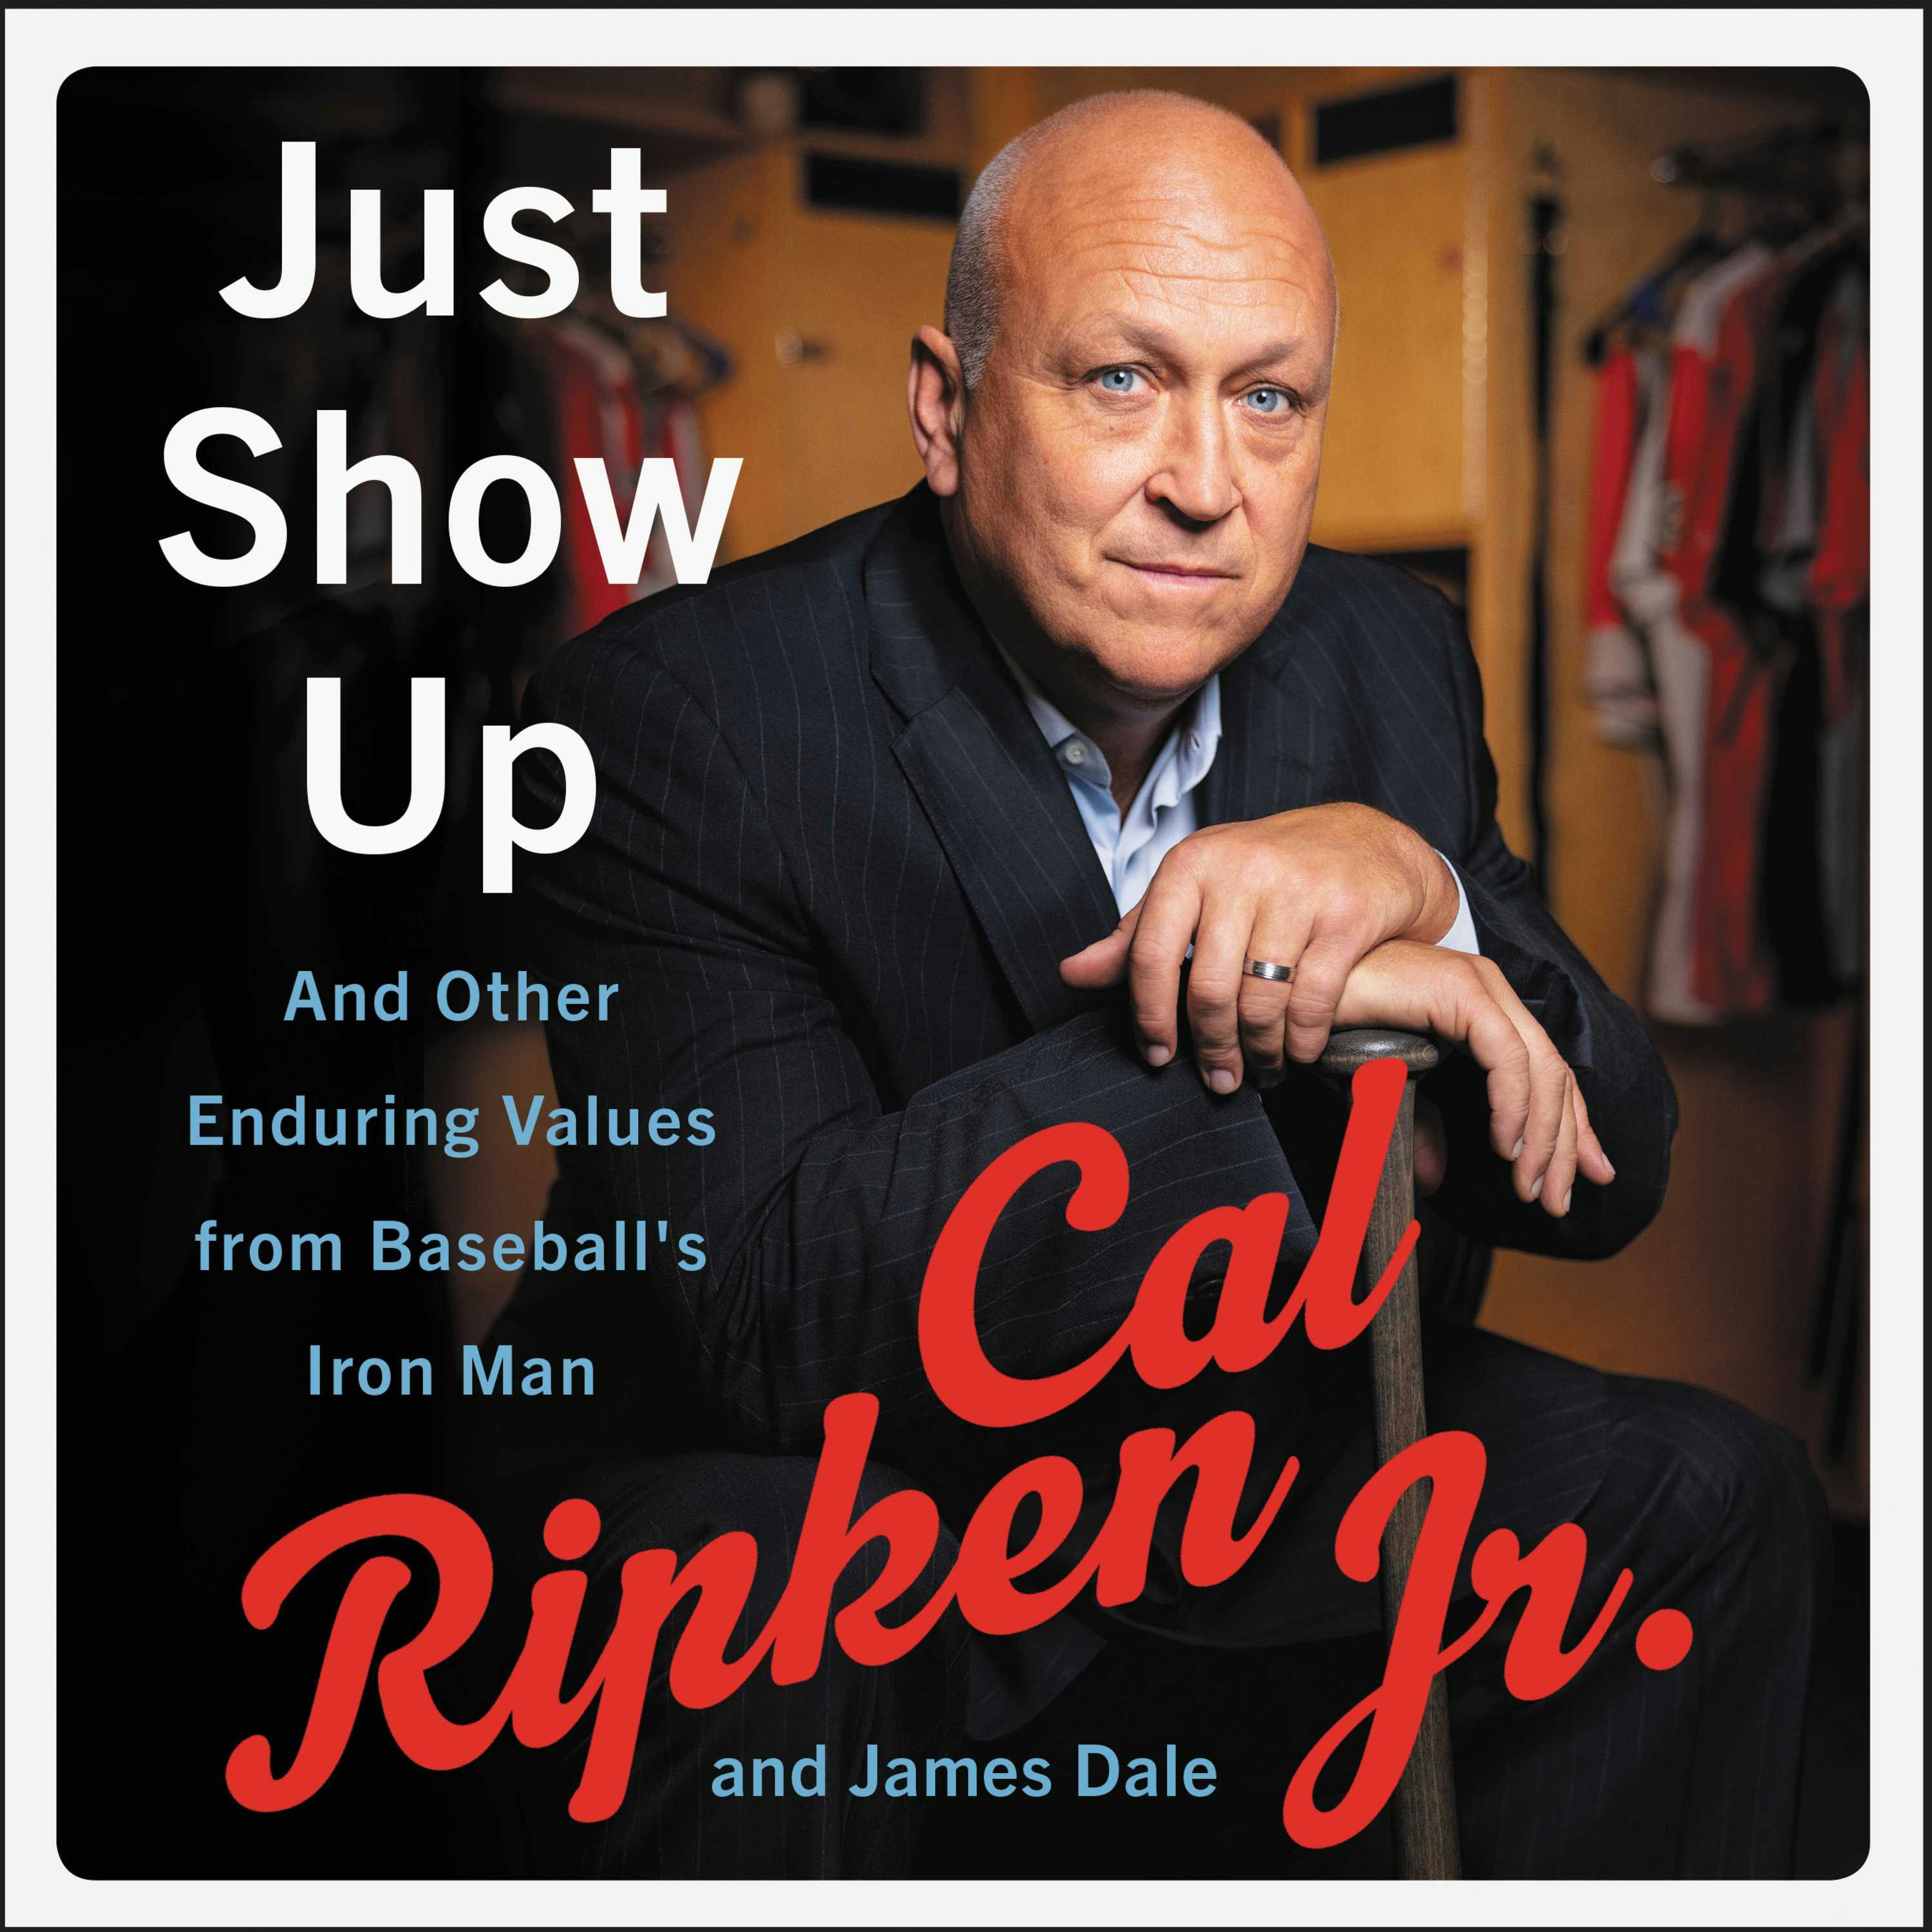 Just Show Up: And Other Enduring Values from Baseball's Iron Man - Cal Ripken Jr., James Dale